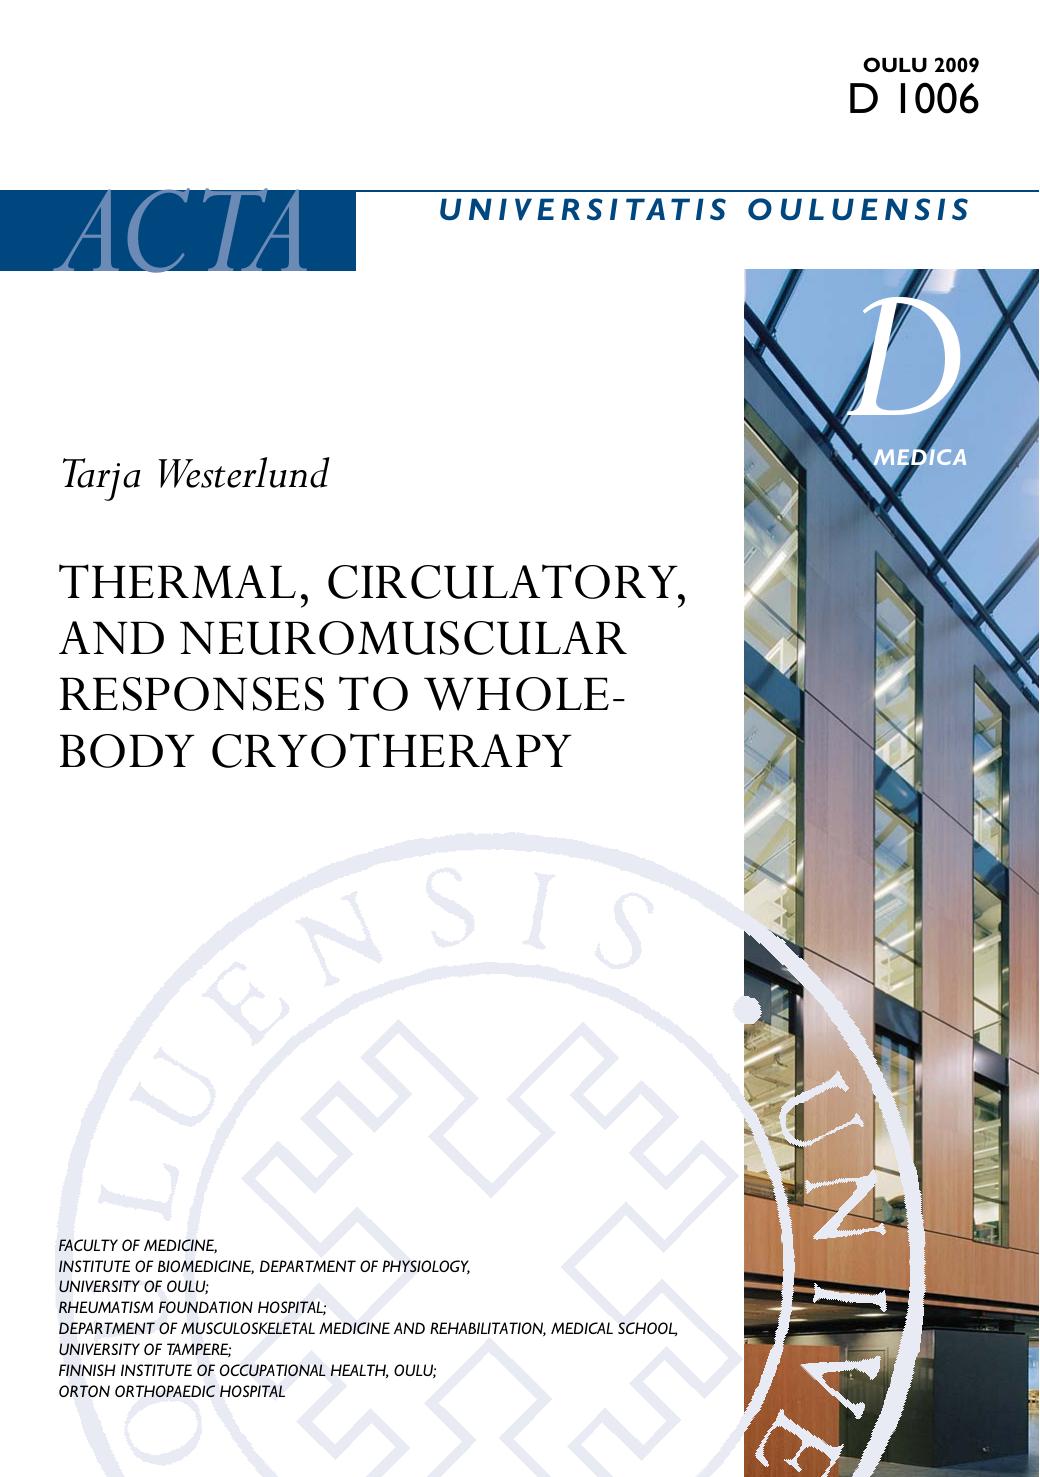 Thermal, circulatory, and neuromuscular responses to whole-body cryotherapy